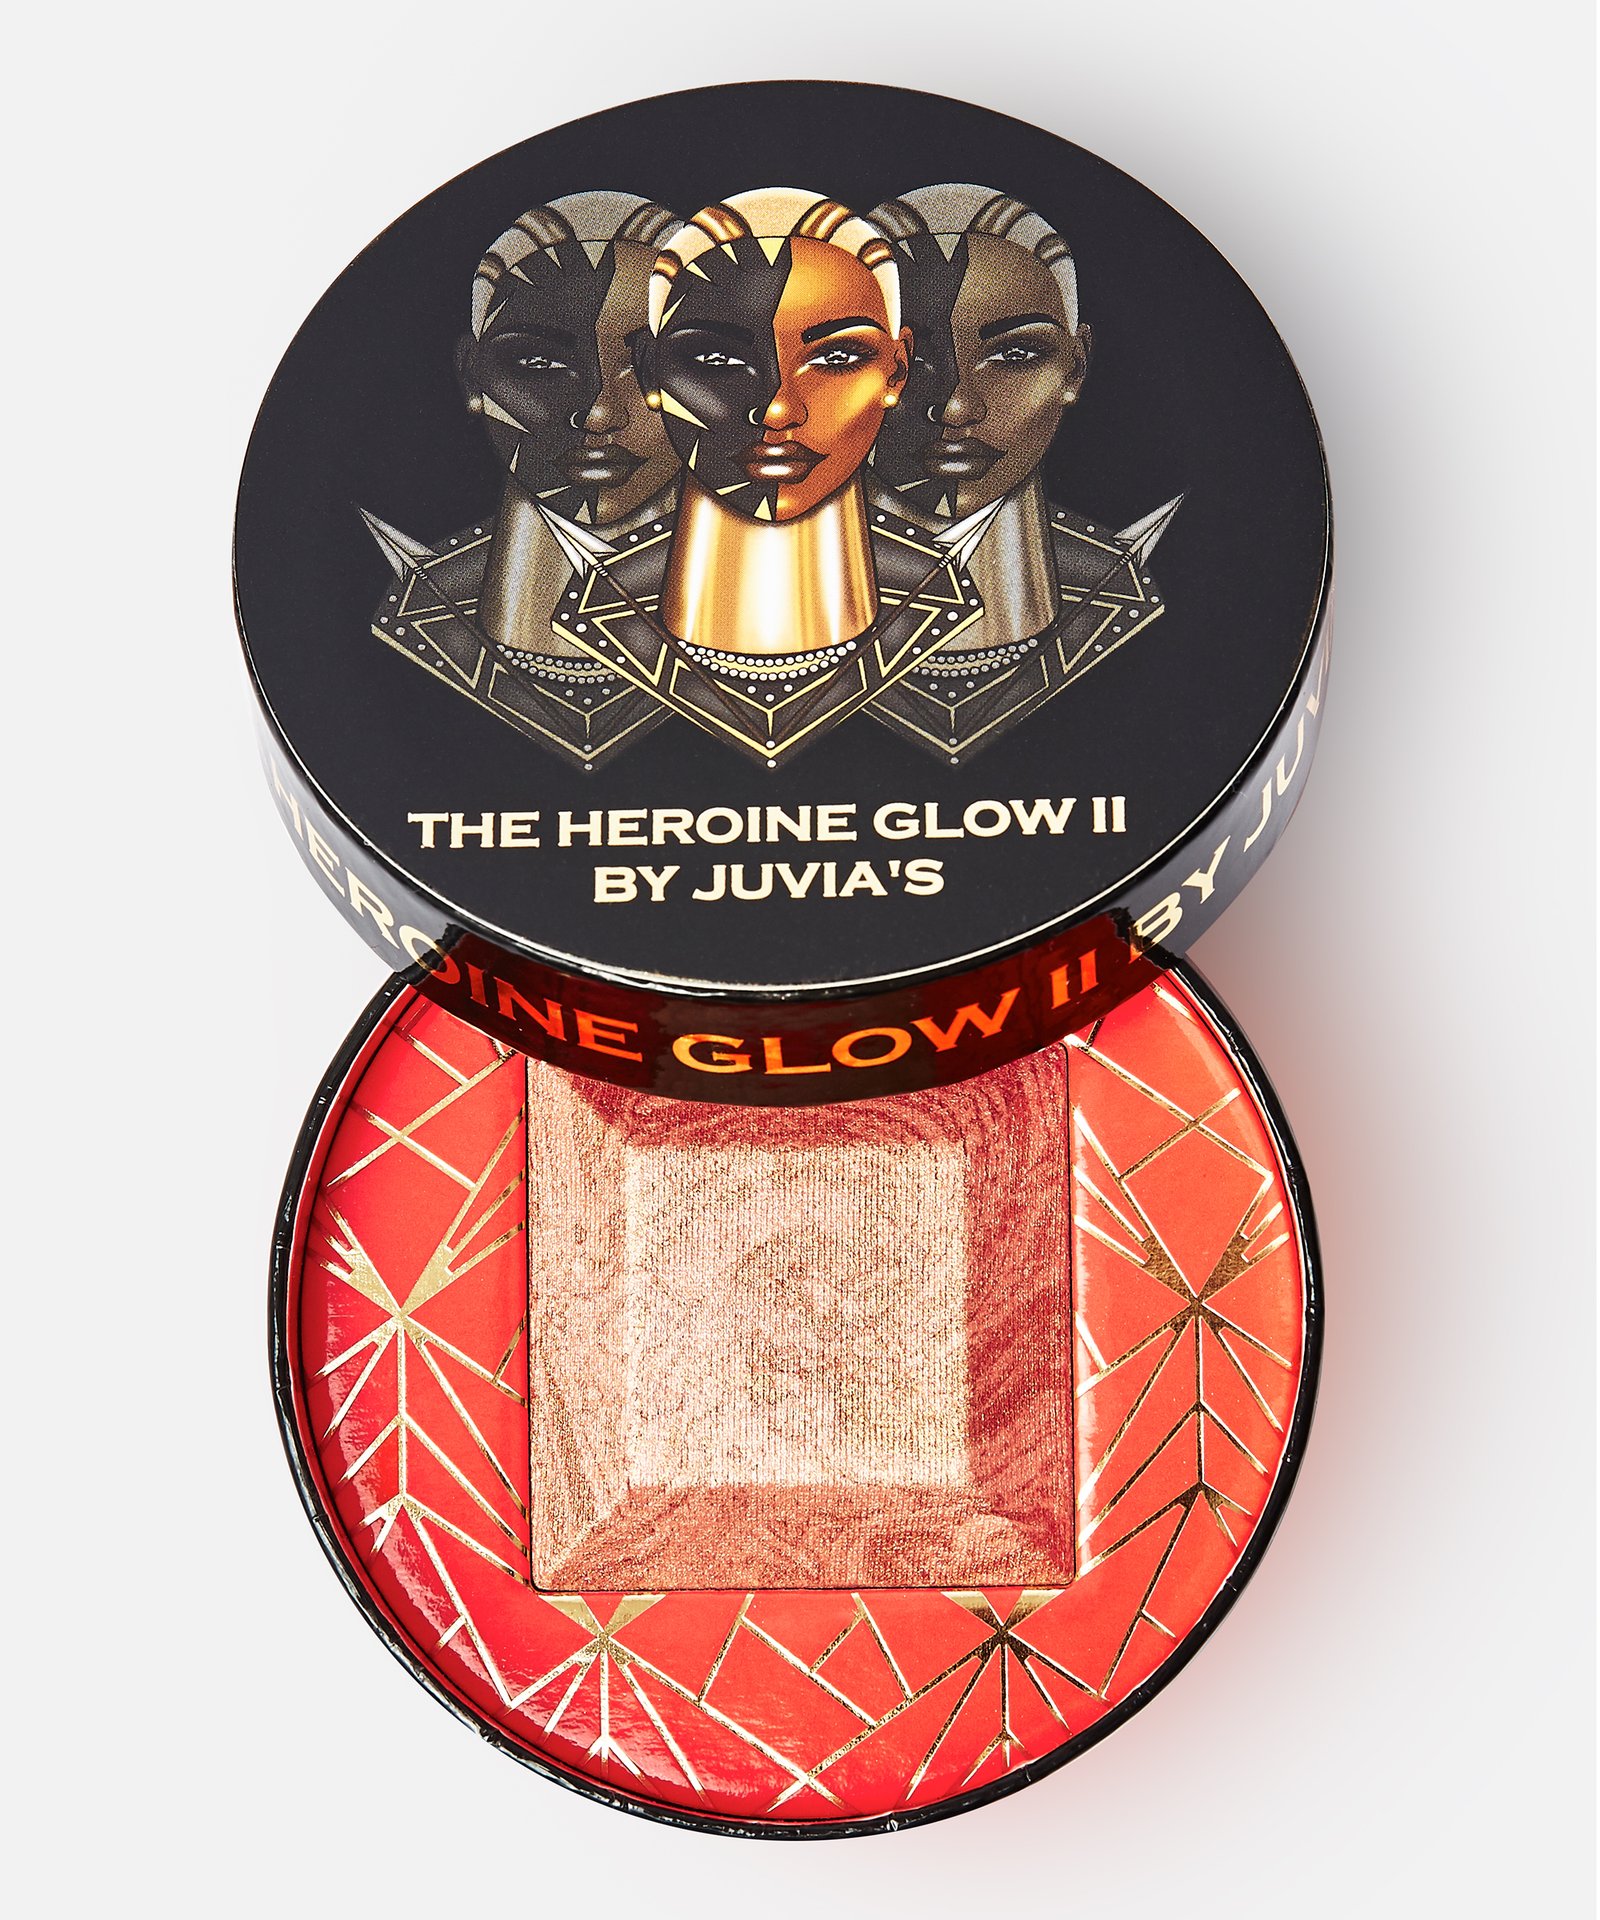 The heroine glow ll by juvias